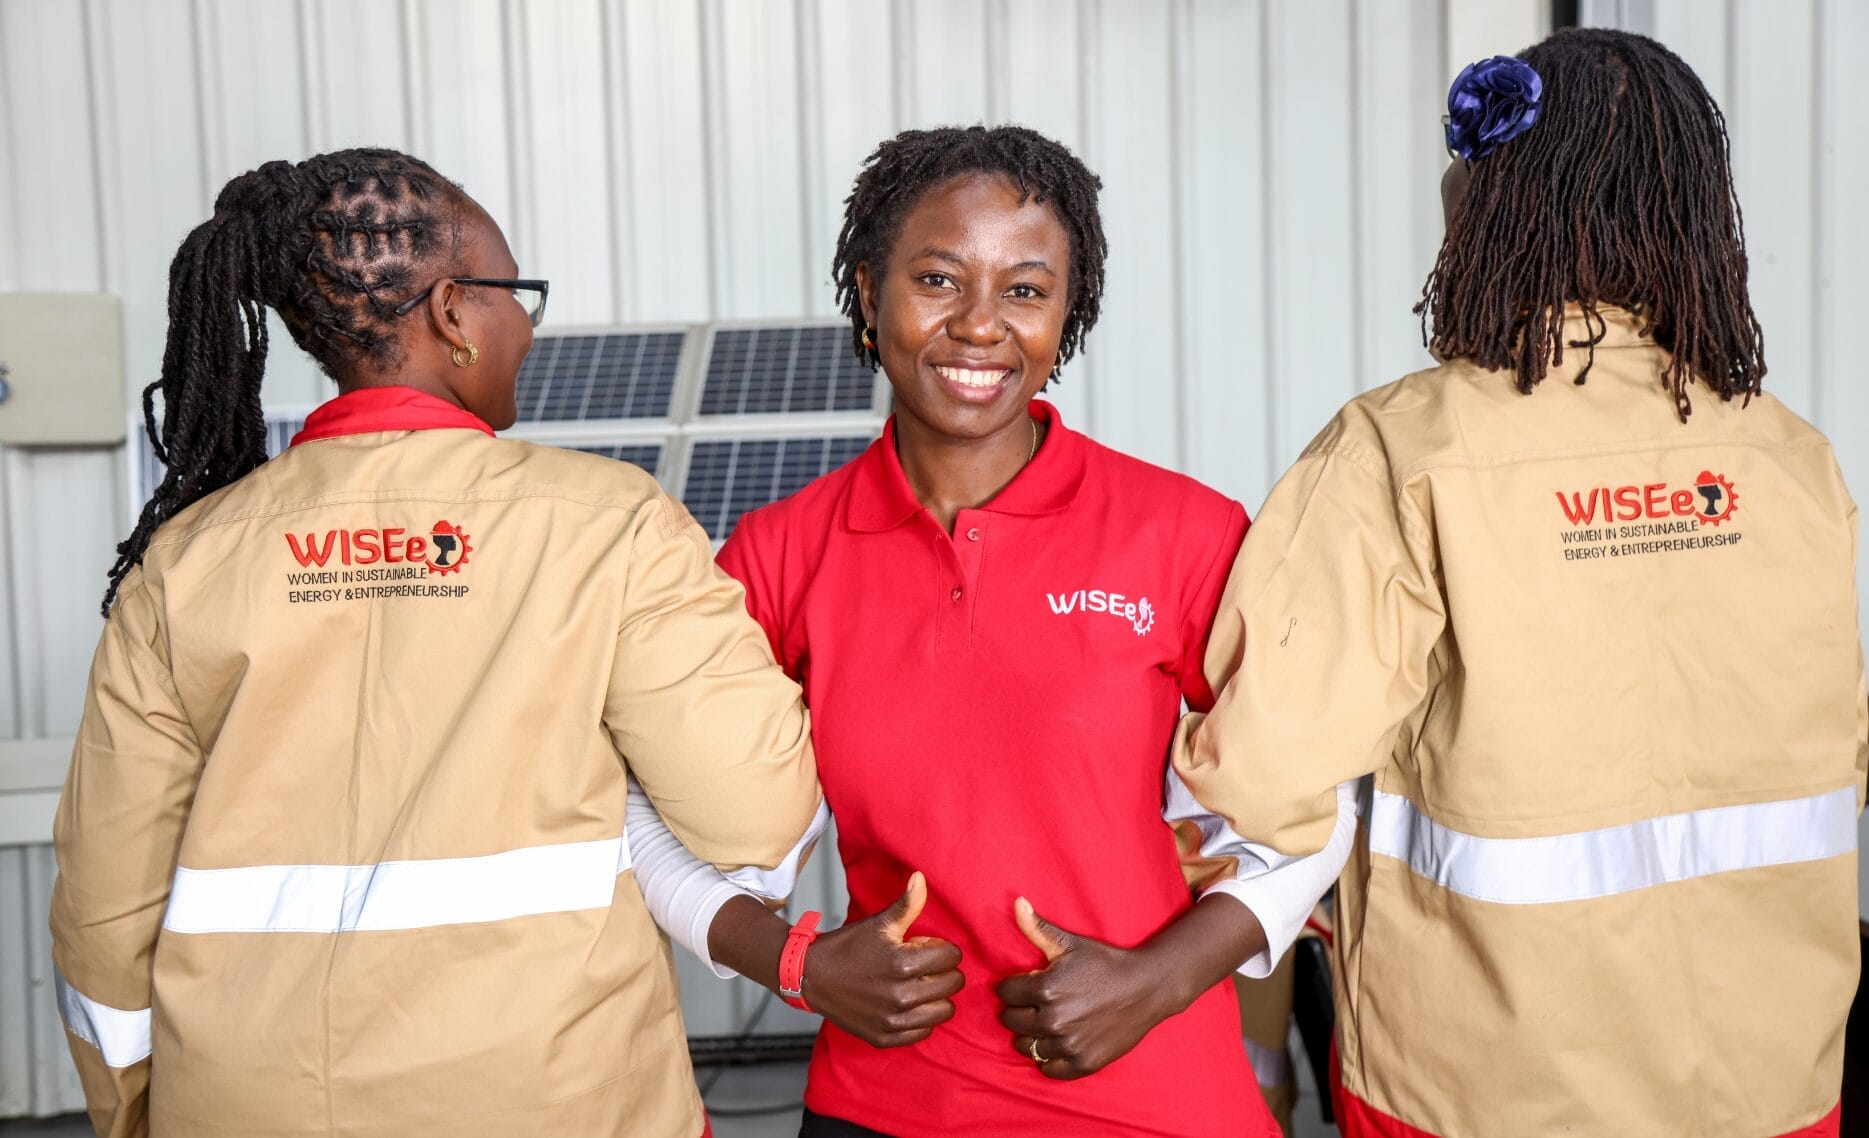 WISEe members smiling and showing their uniforms.